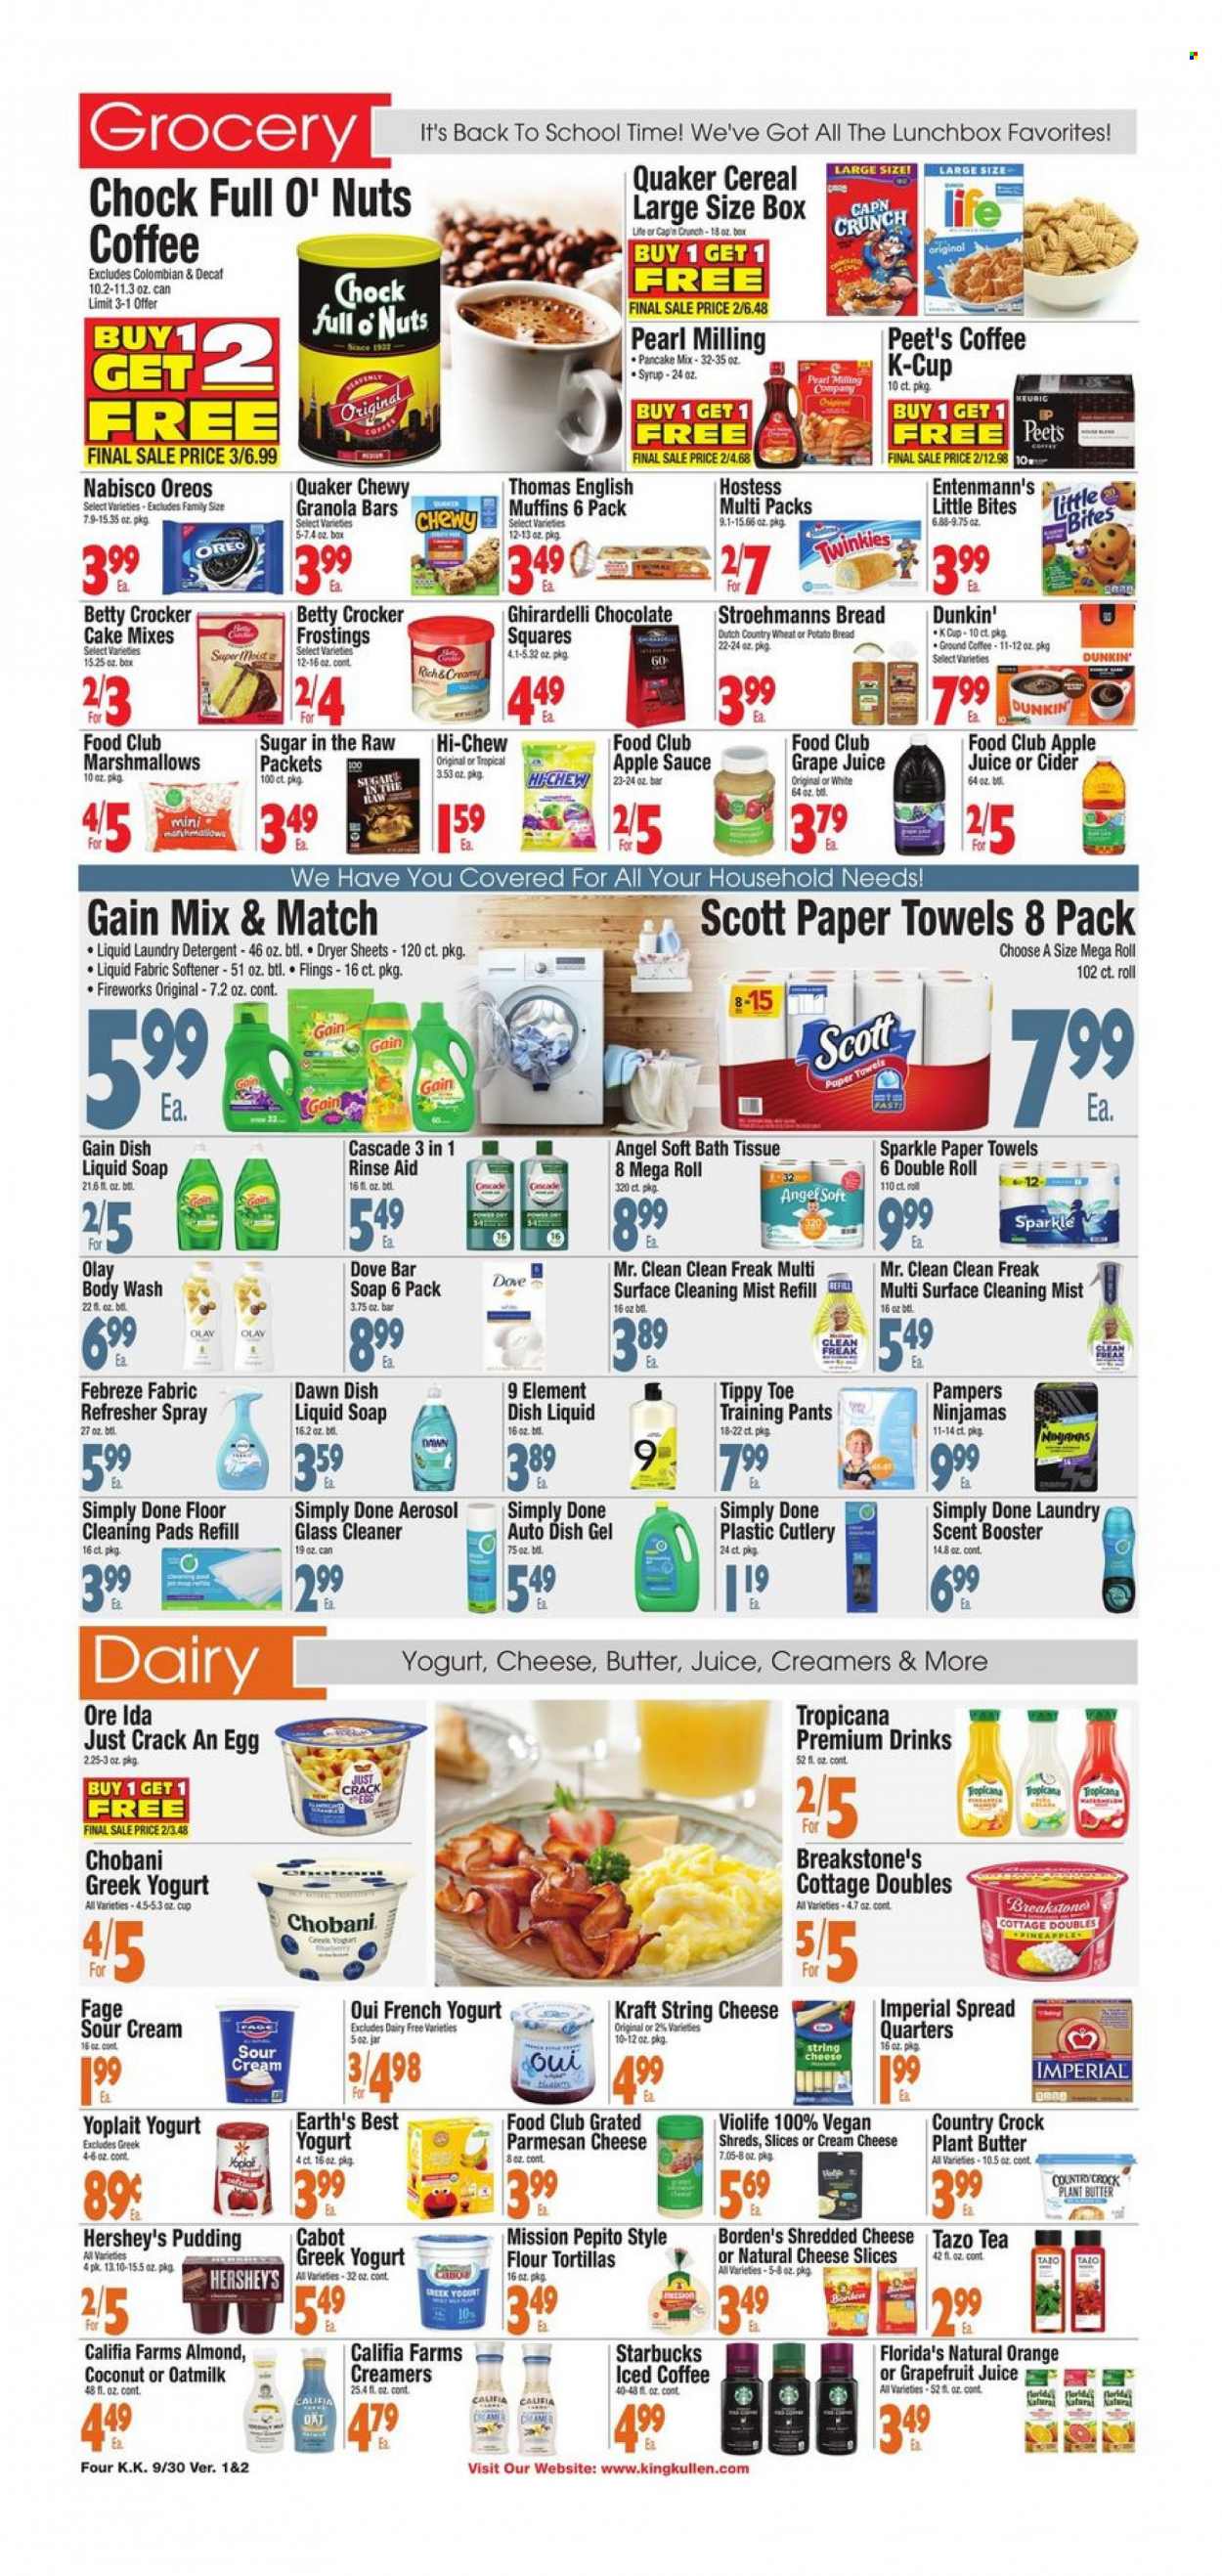 thumbnail - King Kullen Flyer - 09/30/2022 - 10/06/2022 - Sales products - bread, english muffins, tortillas, cake, flour tortillas, Entenmann's, watermelon, pineapple, oranges, coconut, sauce, pancakes, Quaker, Kraft®, shredded cheese, sliced cheese, string cheese, parmesan, greek yoghurt, pudding, Oreo, yoghurt, Yoplait, Chobani, oat milk, butter, sour cream, Hershey's, Ore-Ida, Dove, marshmallows, chocolate, Ghirardelli, Little Bites, Florida's Natural, cereals, granola bar, apple sauce, syrup, apple juice, juice, iced coffee, tea, Starbucks, ground coffee, coffee capsules, K-Cups, cider, Pampers, pants, baby pants, bath tissue, Scott, kitchen towels, paper towels, detergent, Febreze, Gain, cleaner, glass cleaner, cleaning pad, Cascade, fabric softener, laundry detergent, dryer sheets, dishwashing liquid, body wash, soap bar, soap, Olay, refresher, jar, meal box. Page 4.